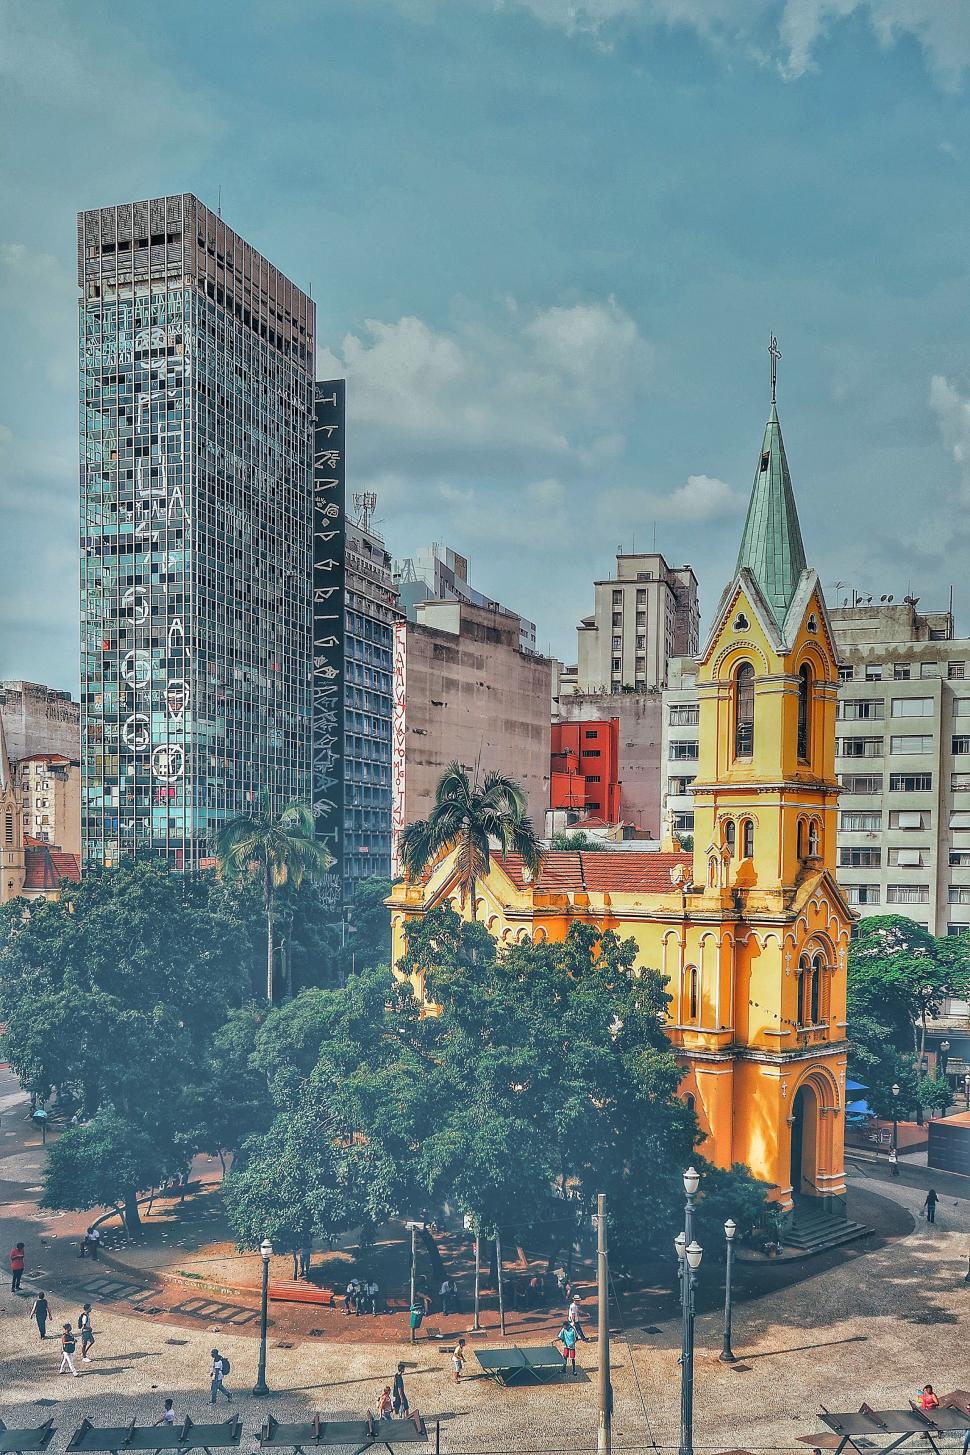 Free Image of Large Yellow Church Among Tall City Buildings 